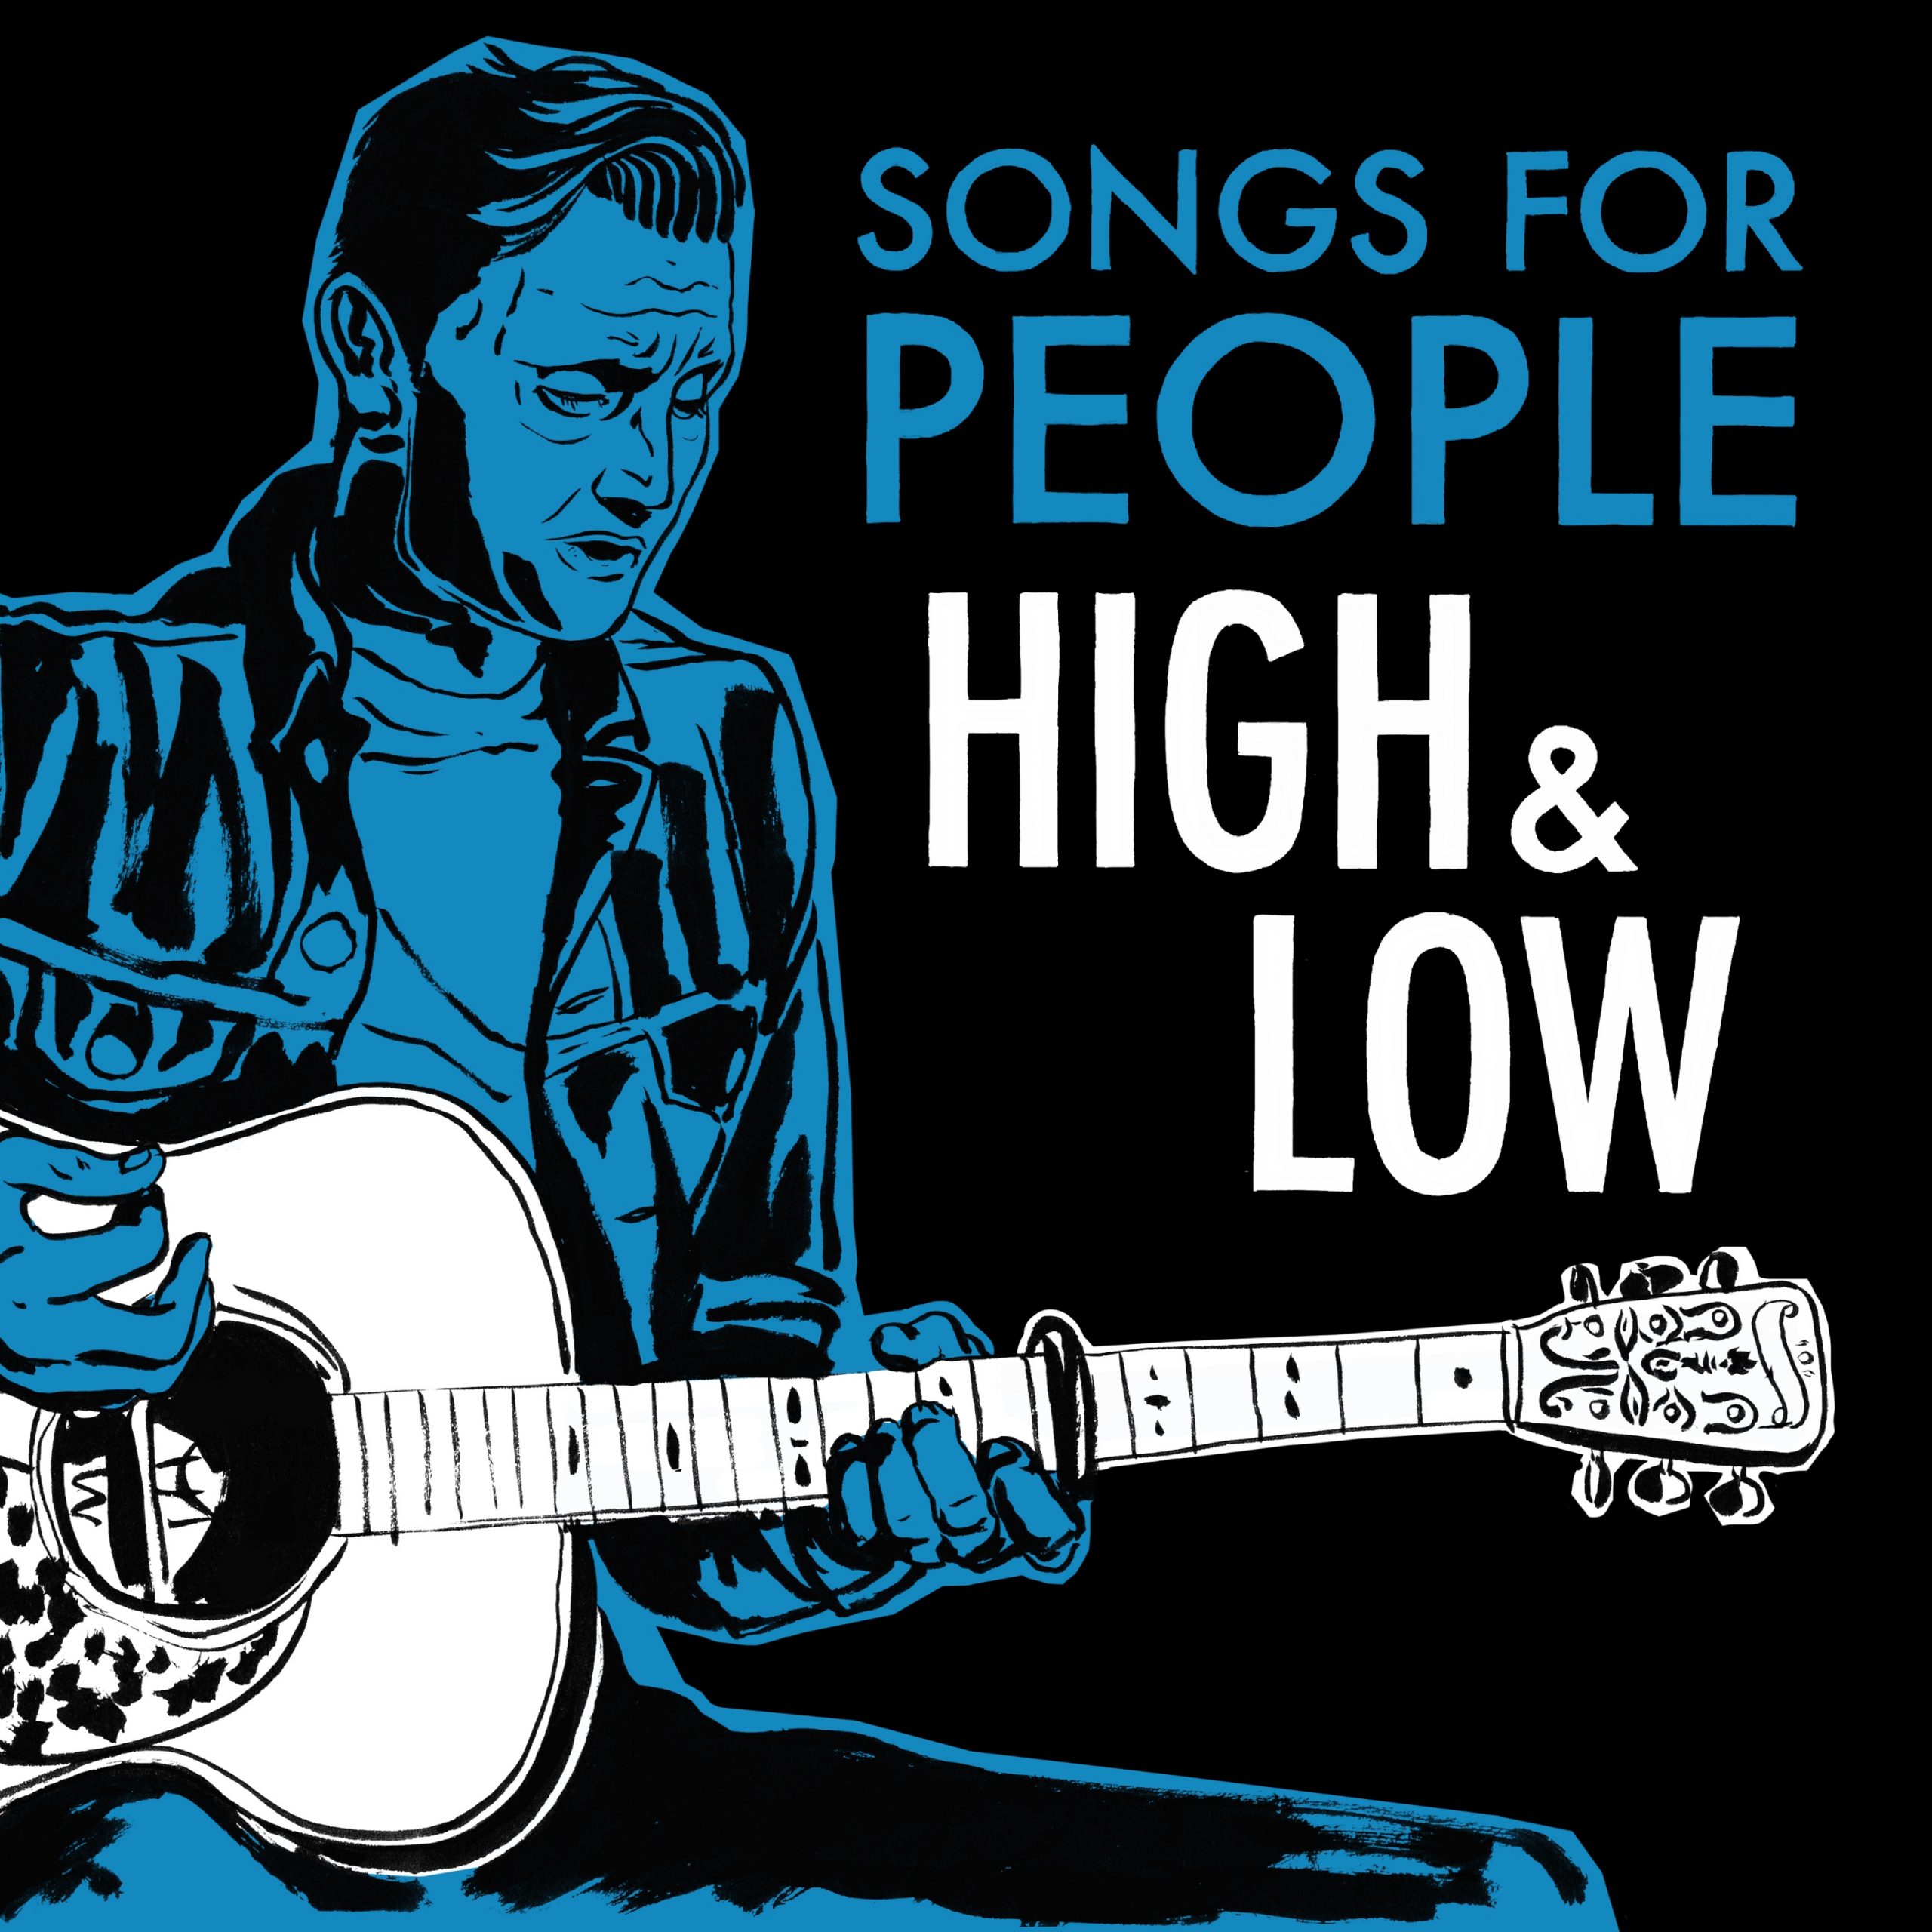 FULL SONG HIGH & LOW*, This & That